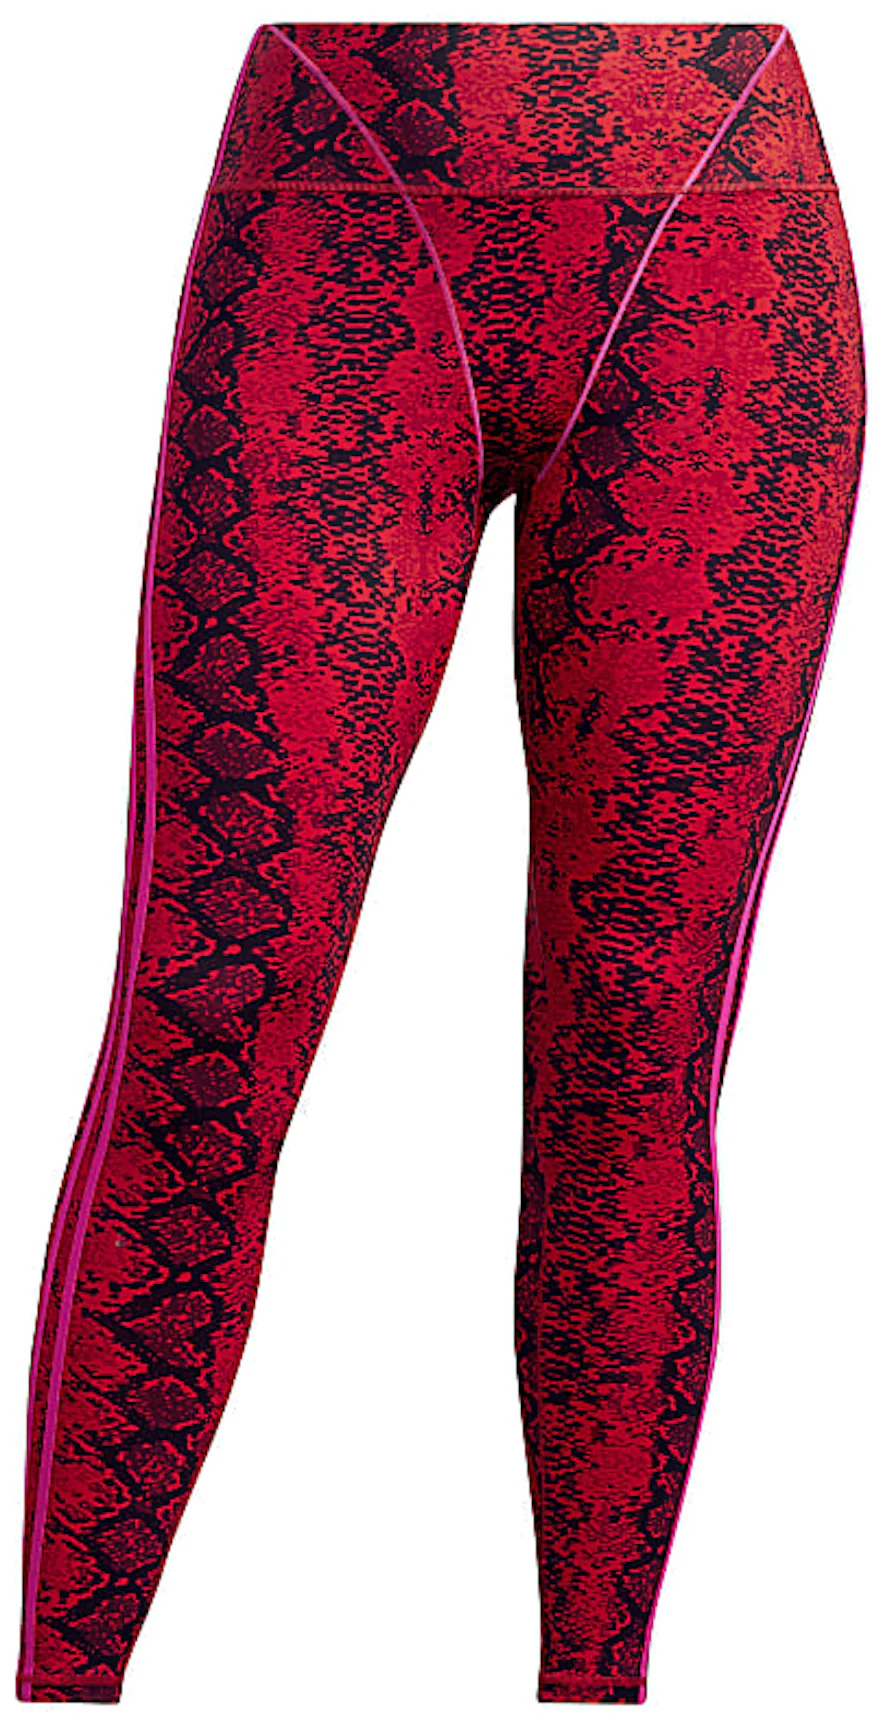 adidas Ivy Park Allover Print Tights (Plus Size) Red/Black - SS22 - US